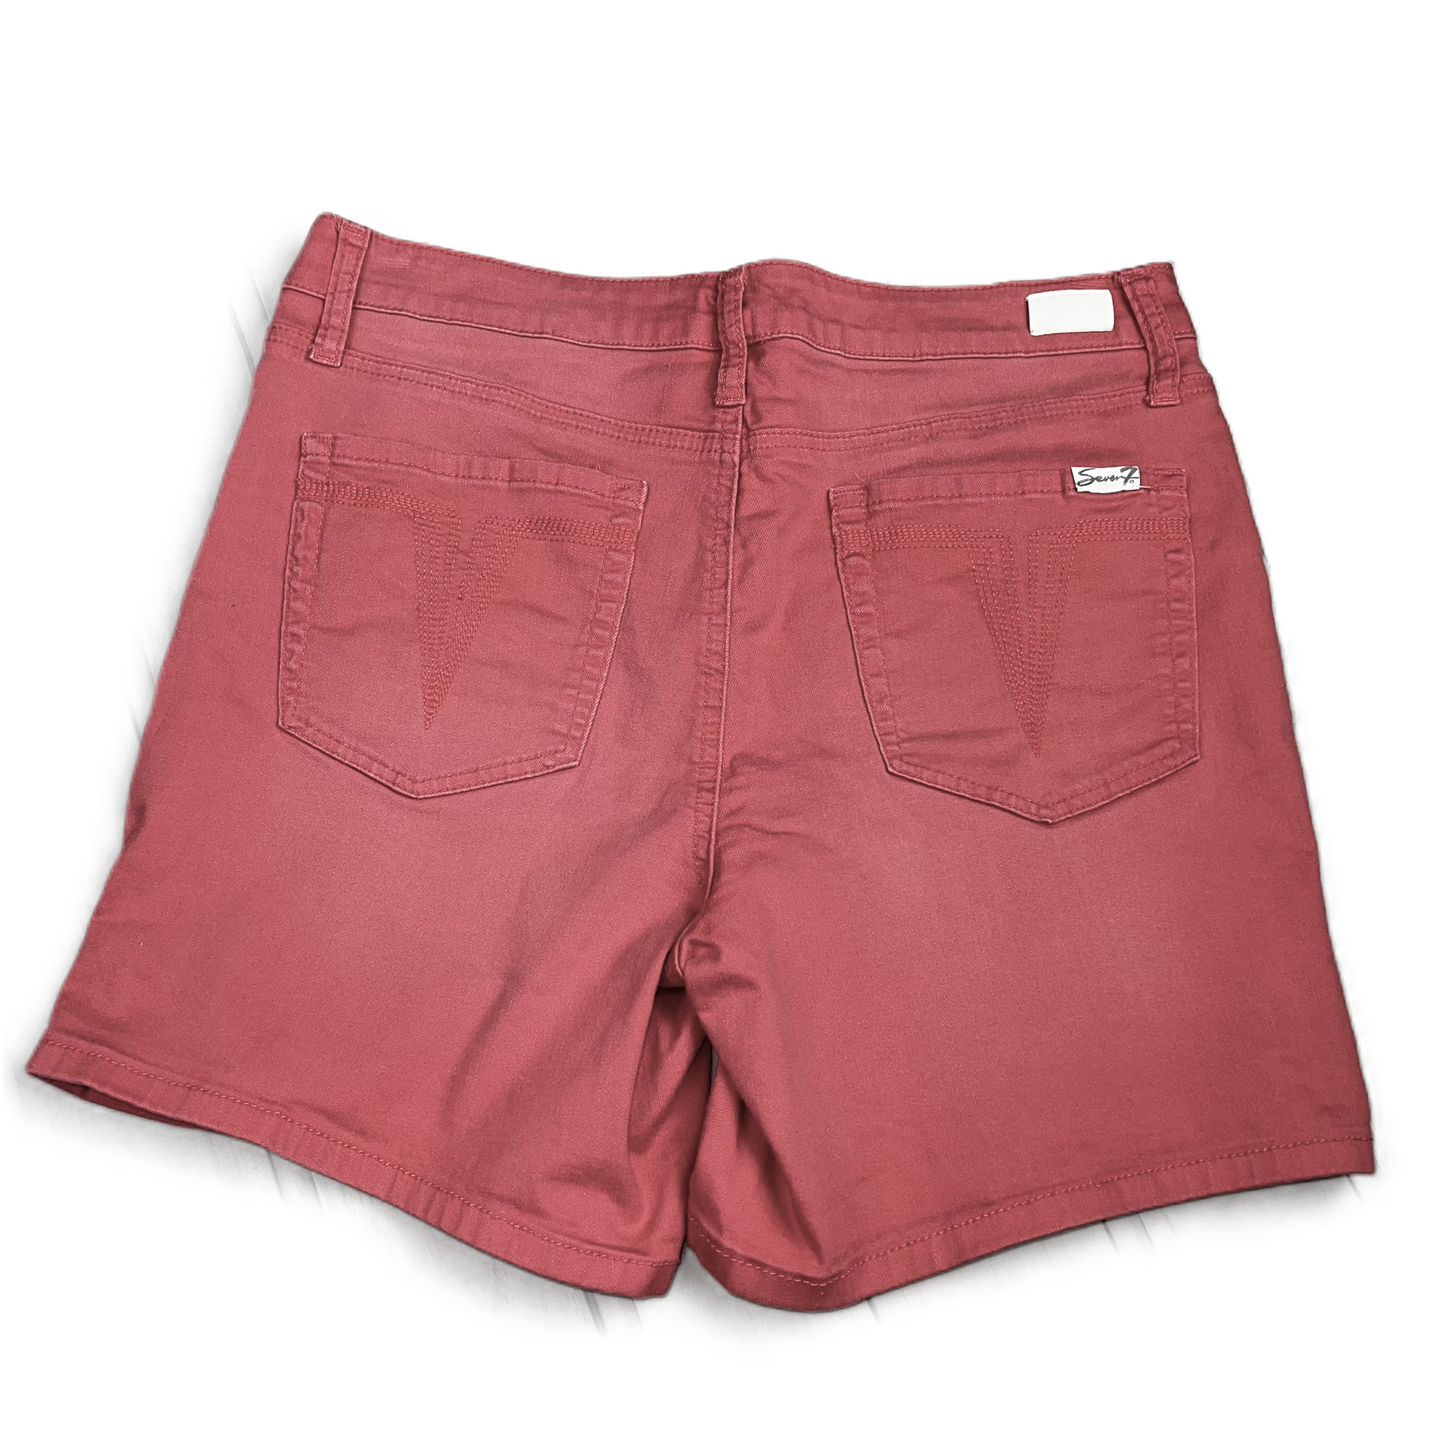 Pink Denim Shorts By Seven 7, Size: 10